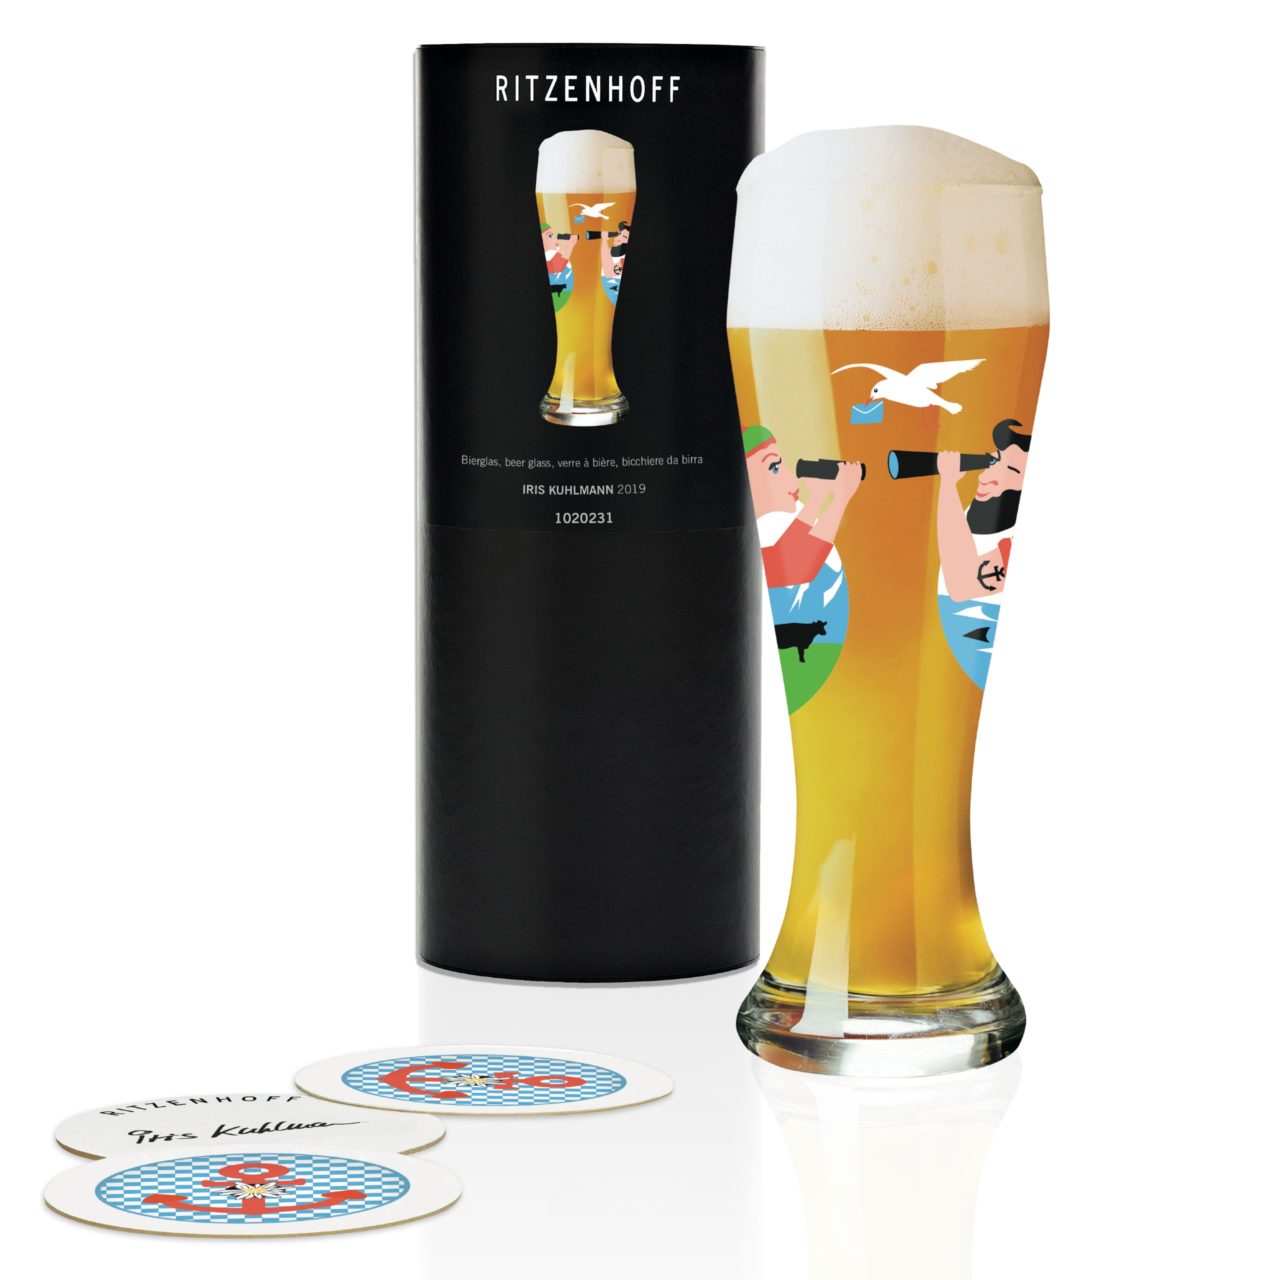 Boxed Ritzenhoff Illustrated  Beer Glass Auge 1996 Germany 